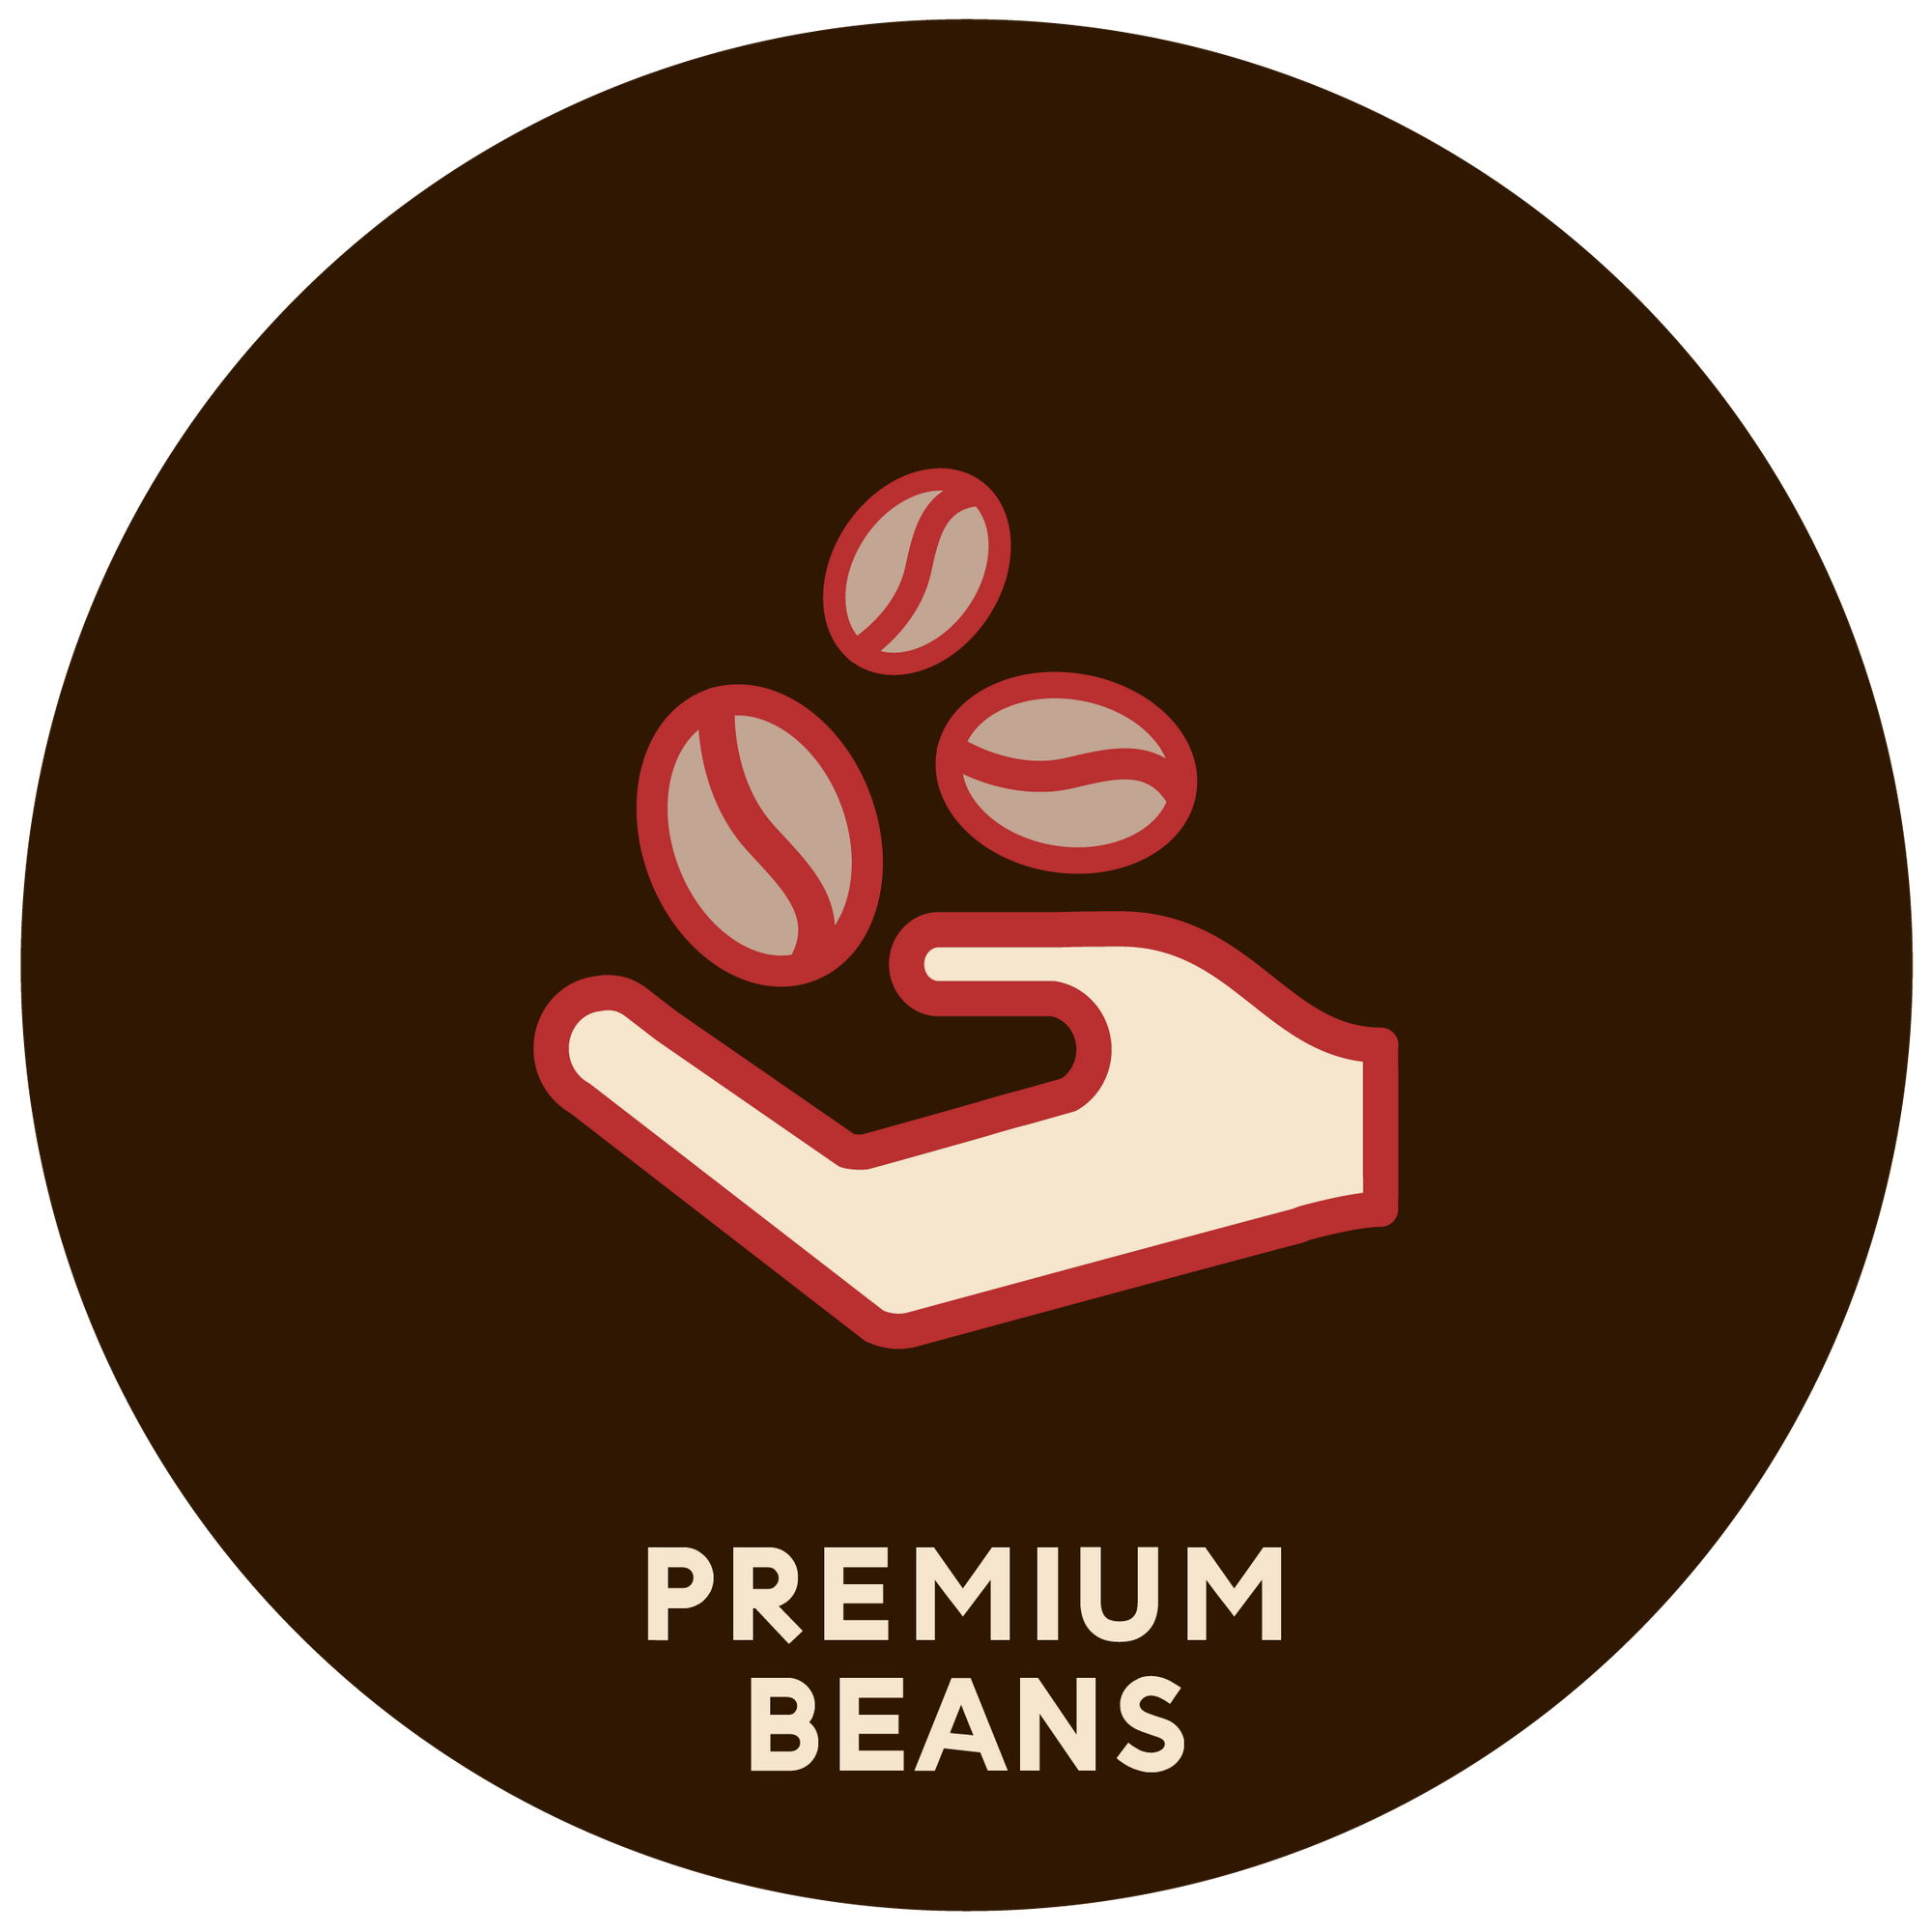 Espresso Canada logo showing they carry premium Caffé Nostro Beans specifically roasted for use in superautomatic espresso machines